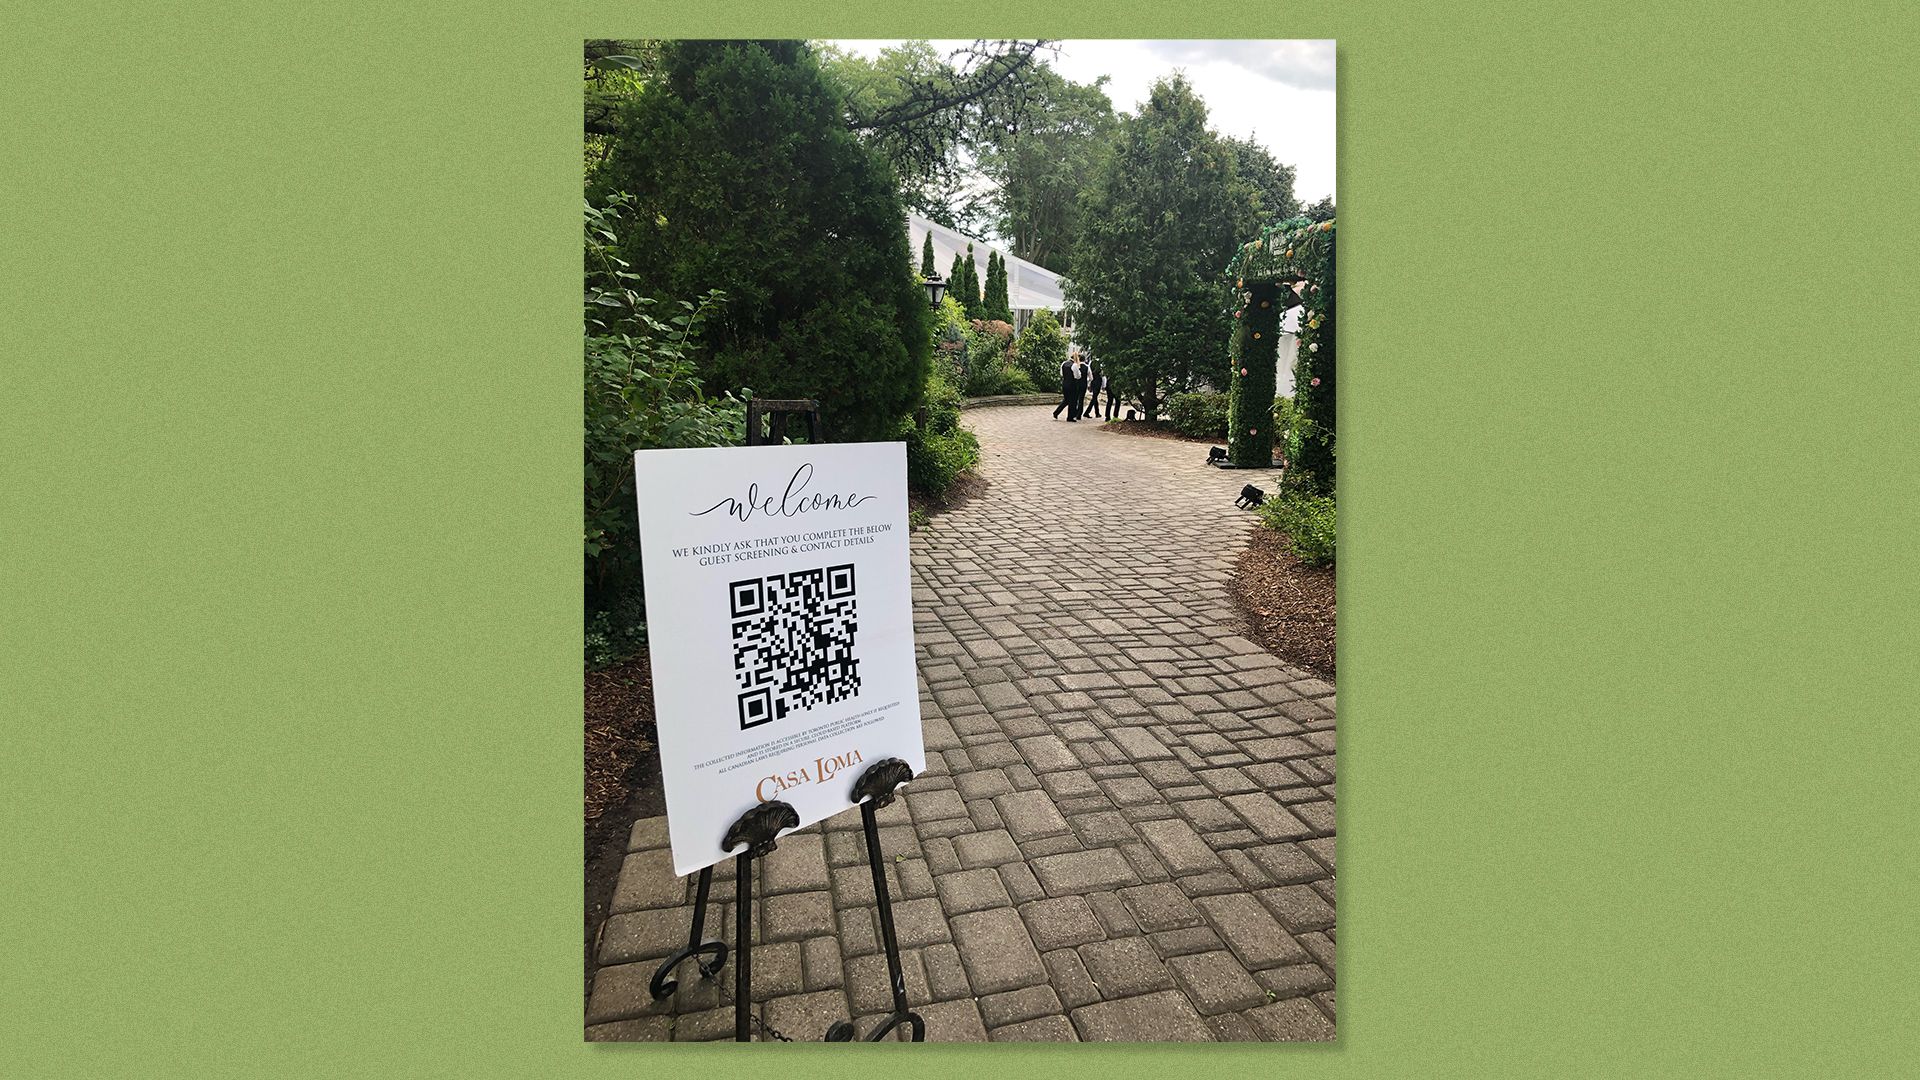 A QR code posted in front of a wedding venue invites people to scan it.